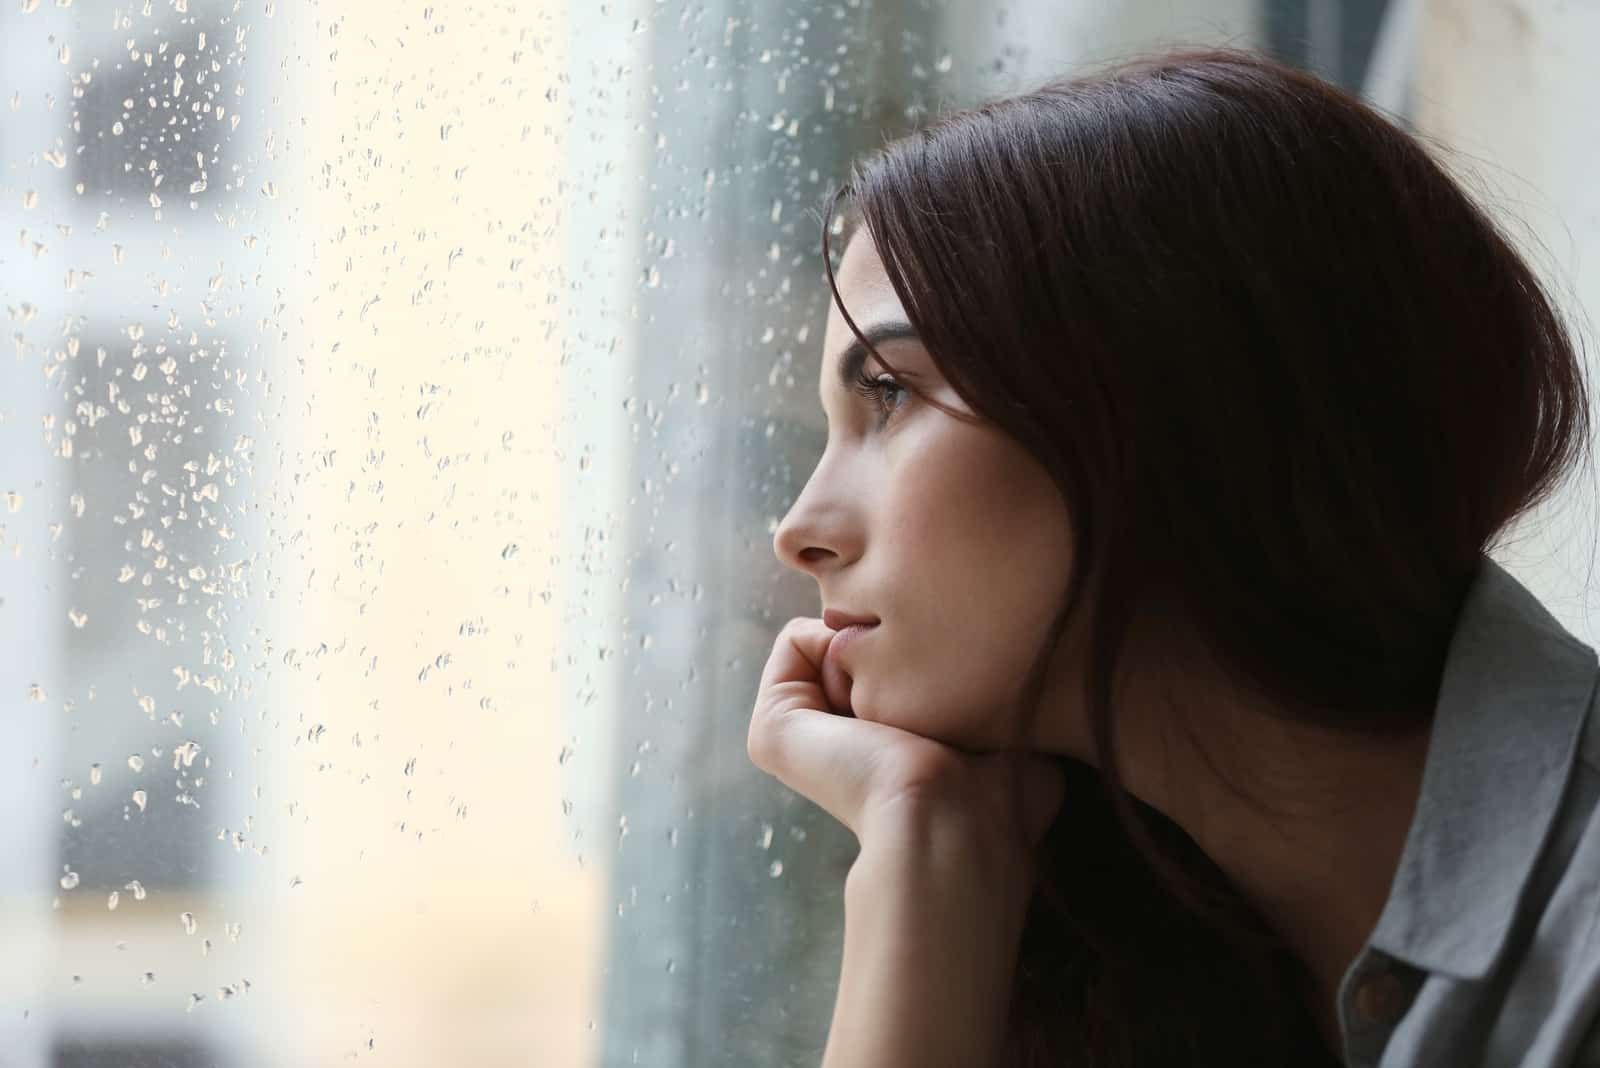 pensive woman looking through window during rainy day